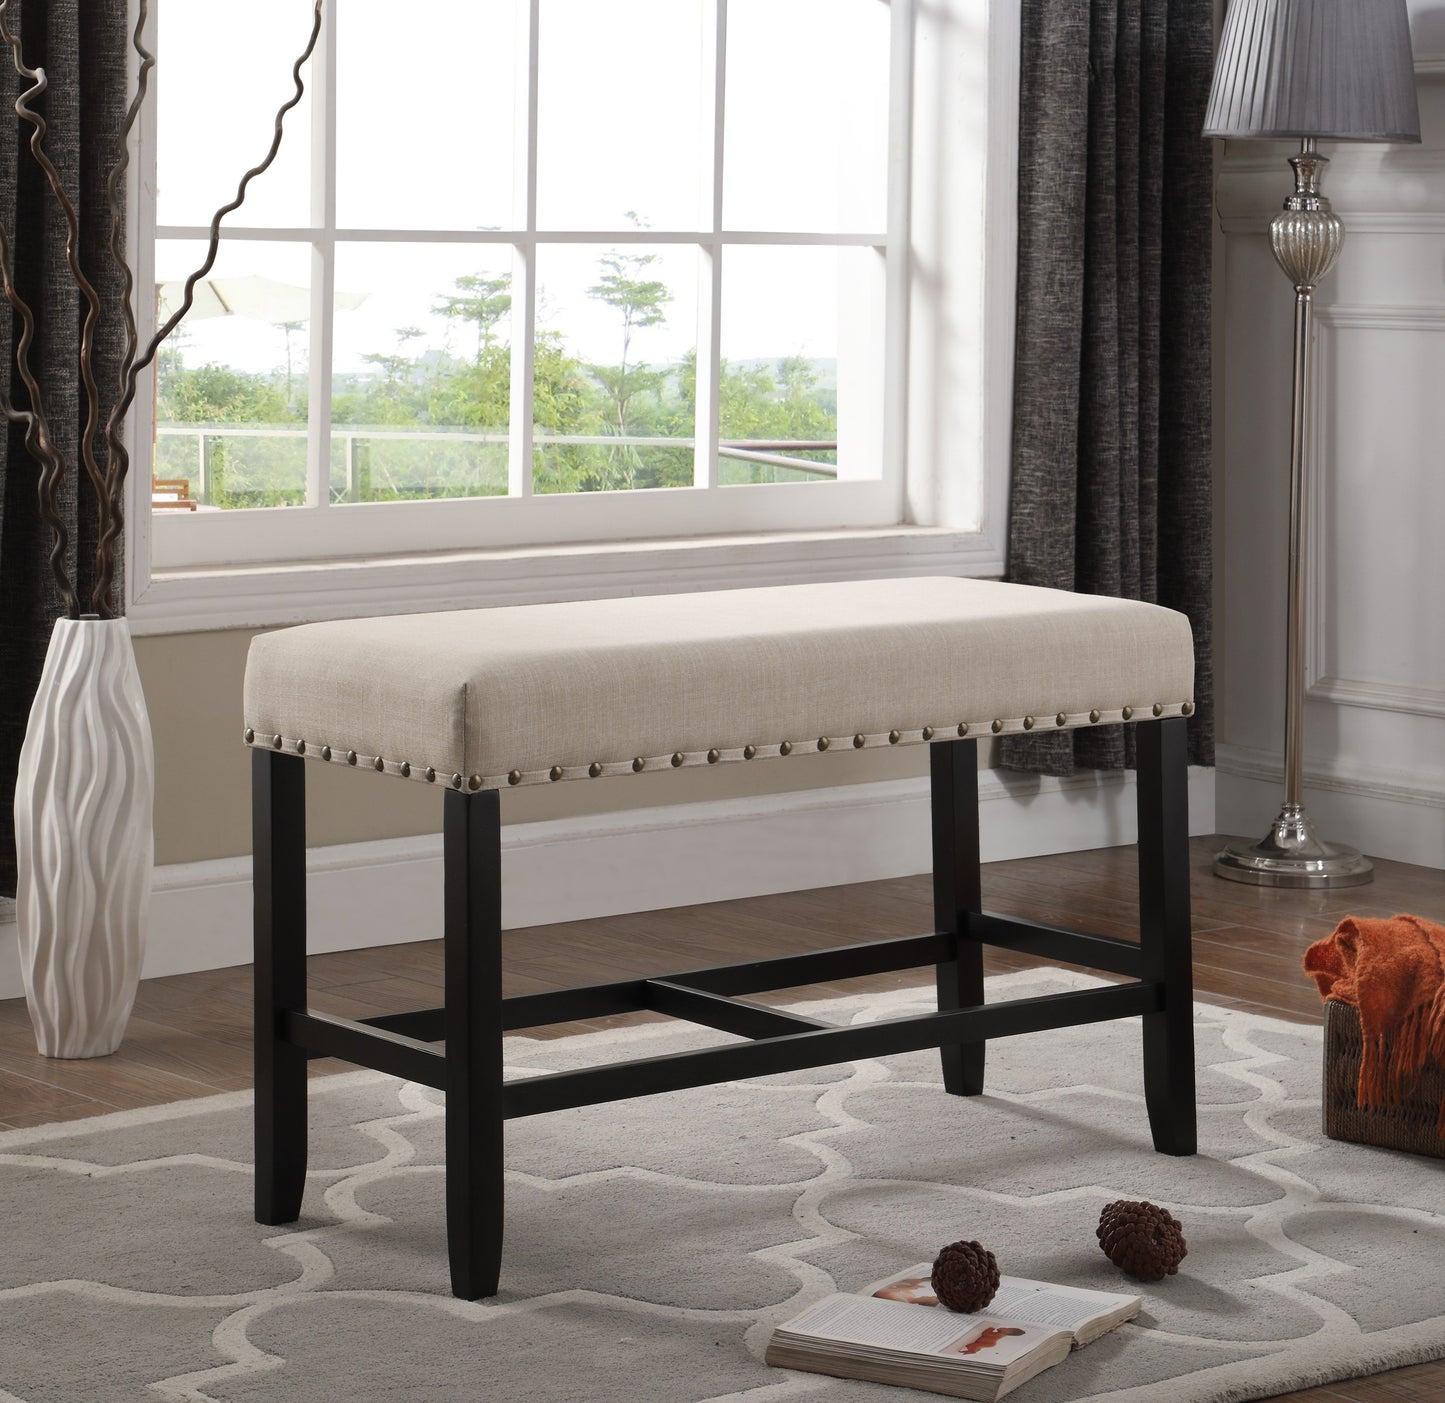 Biony Tan Fabric Counter Height Dining Bench with Nailhead Trim